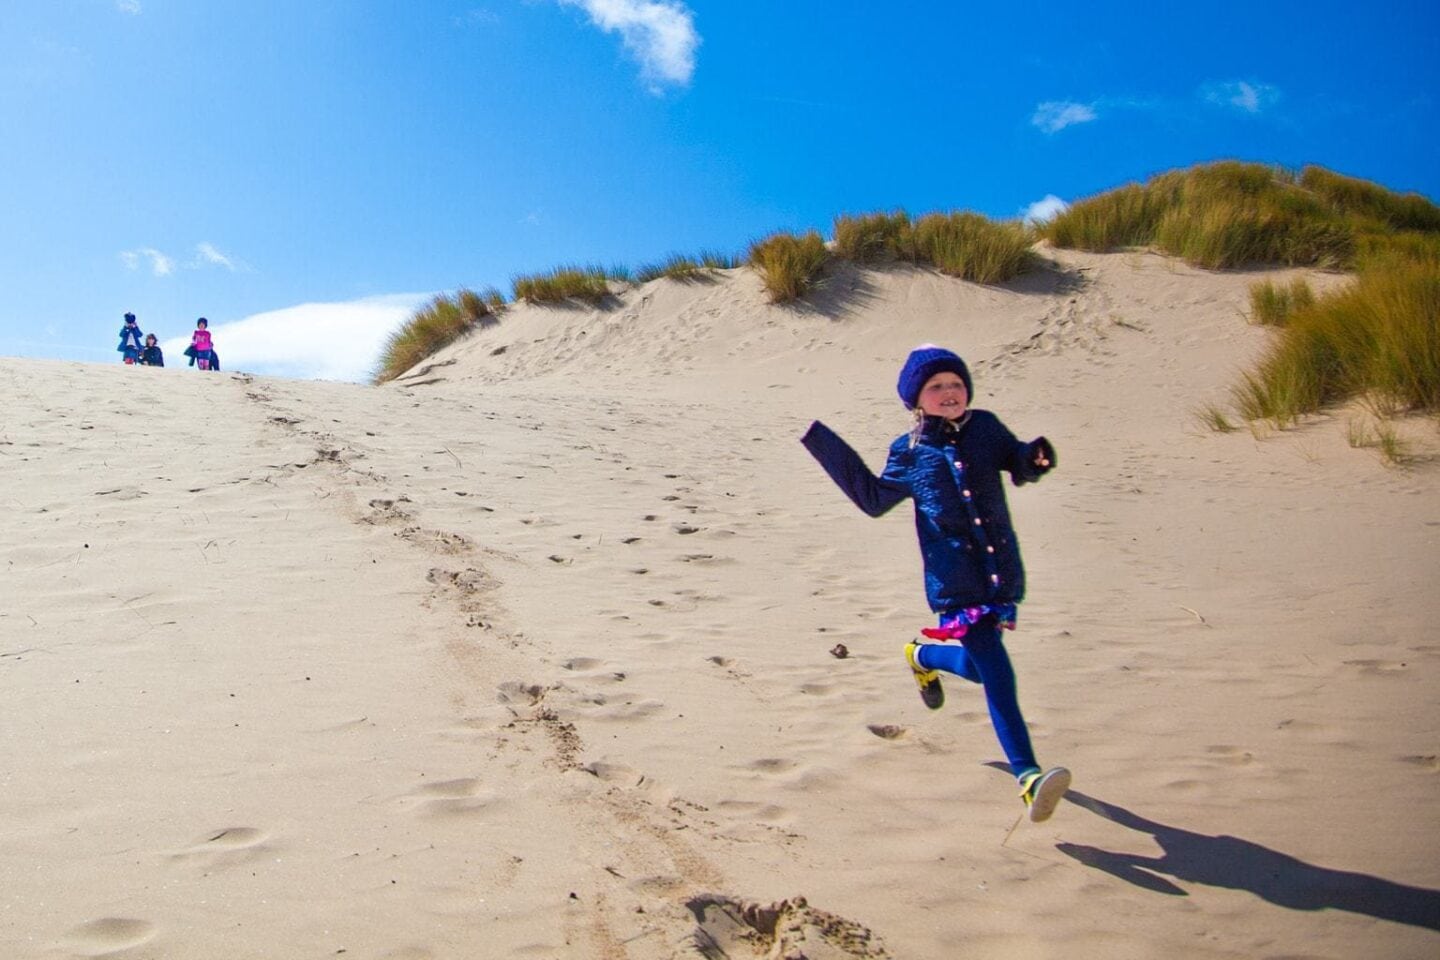 Family Day Out at Formby Sand Dunes www.minitravellers.co.uk